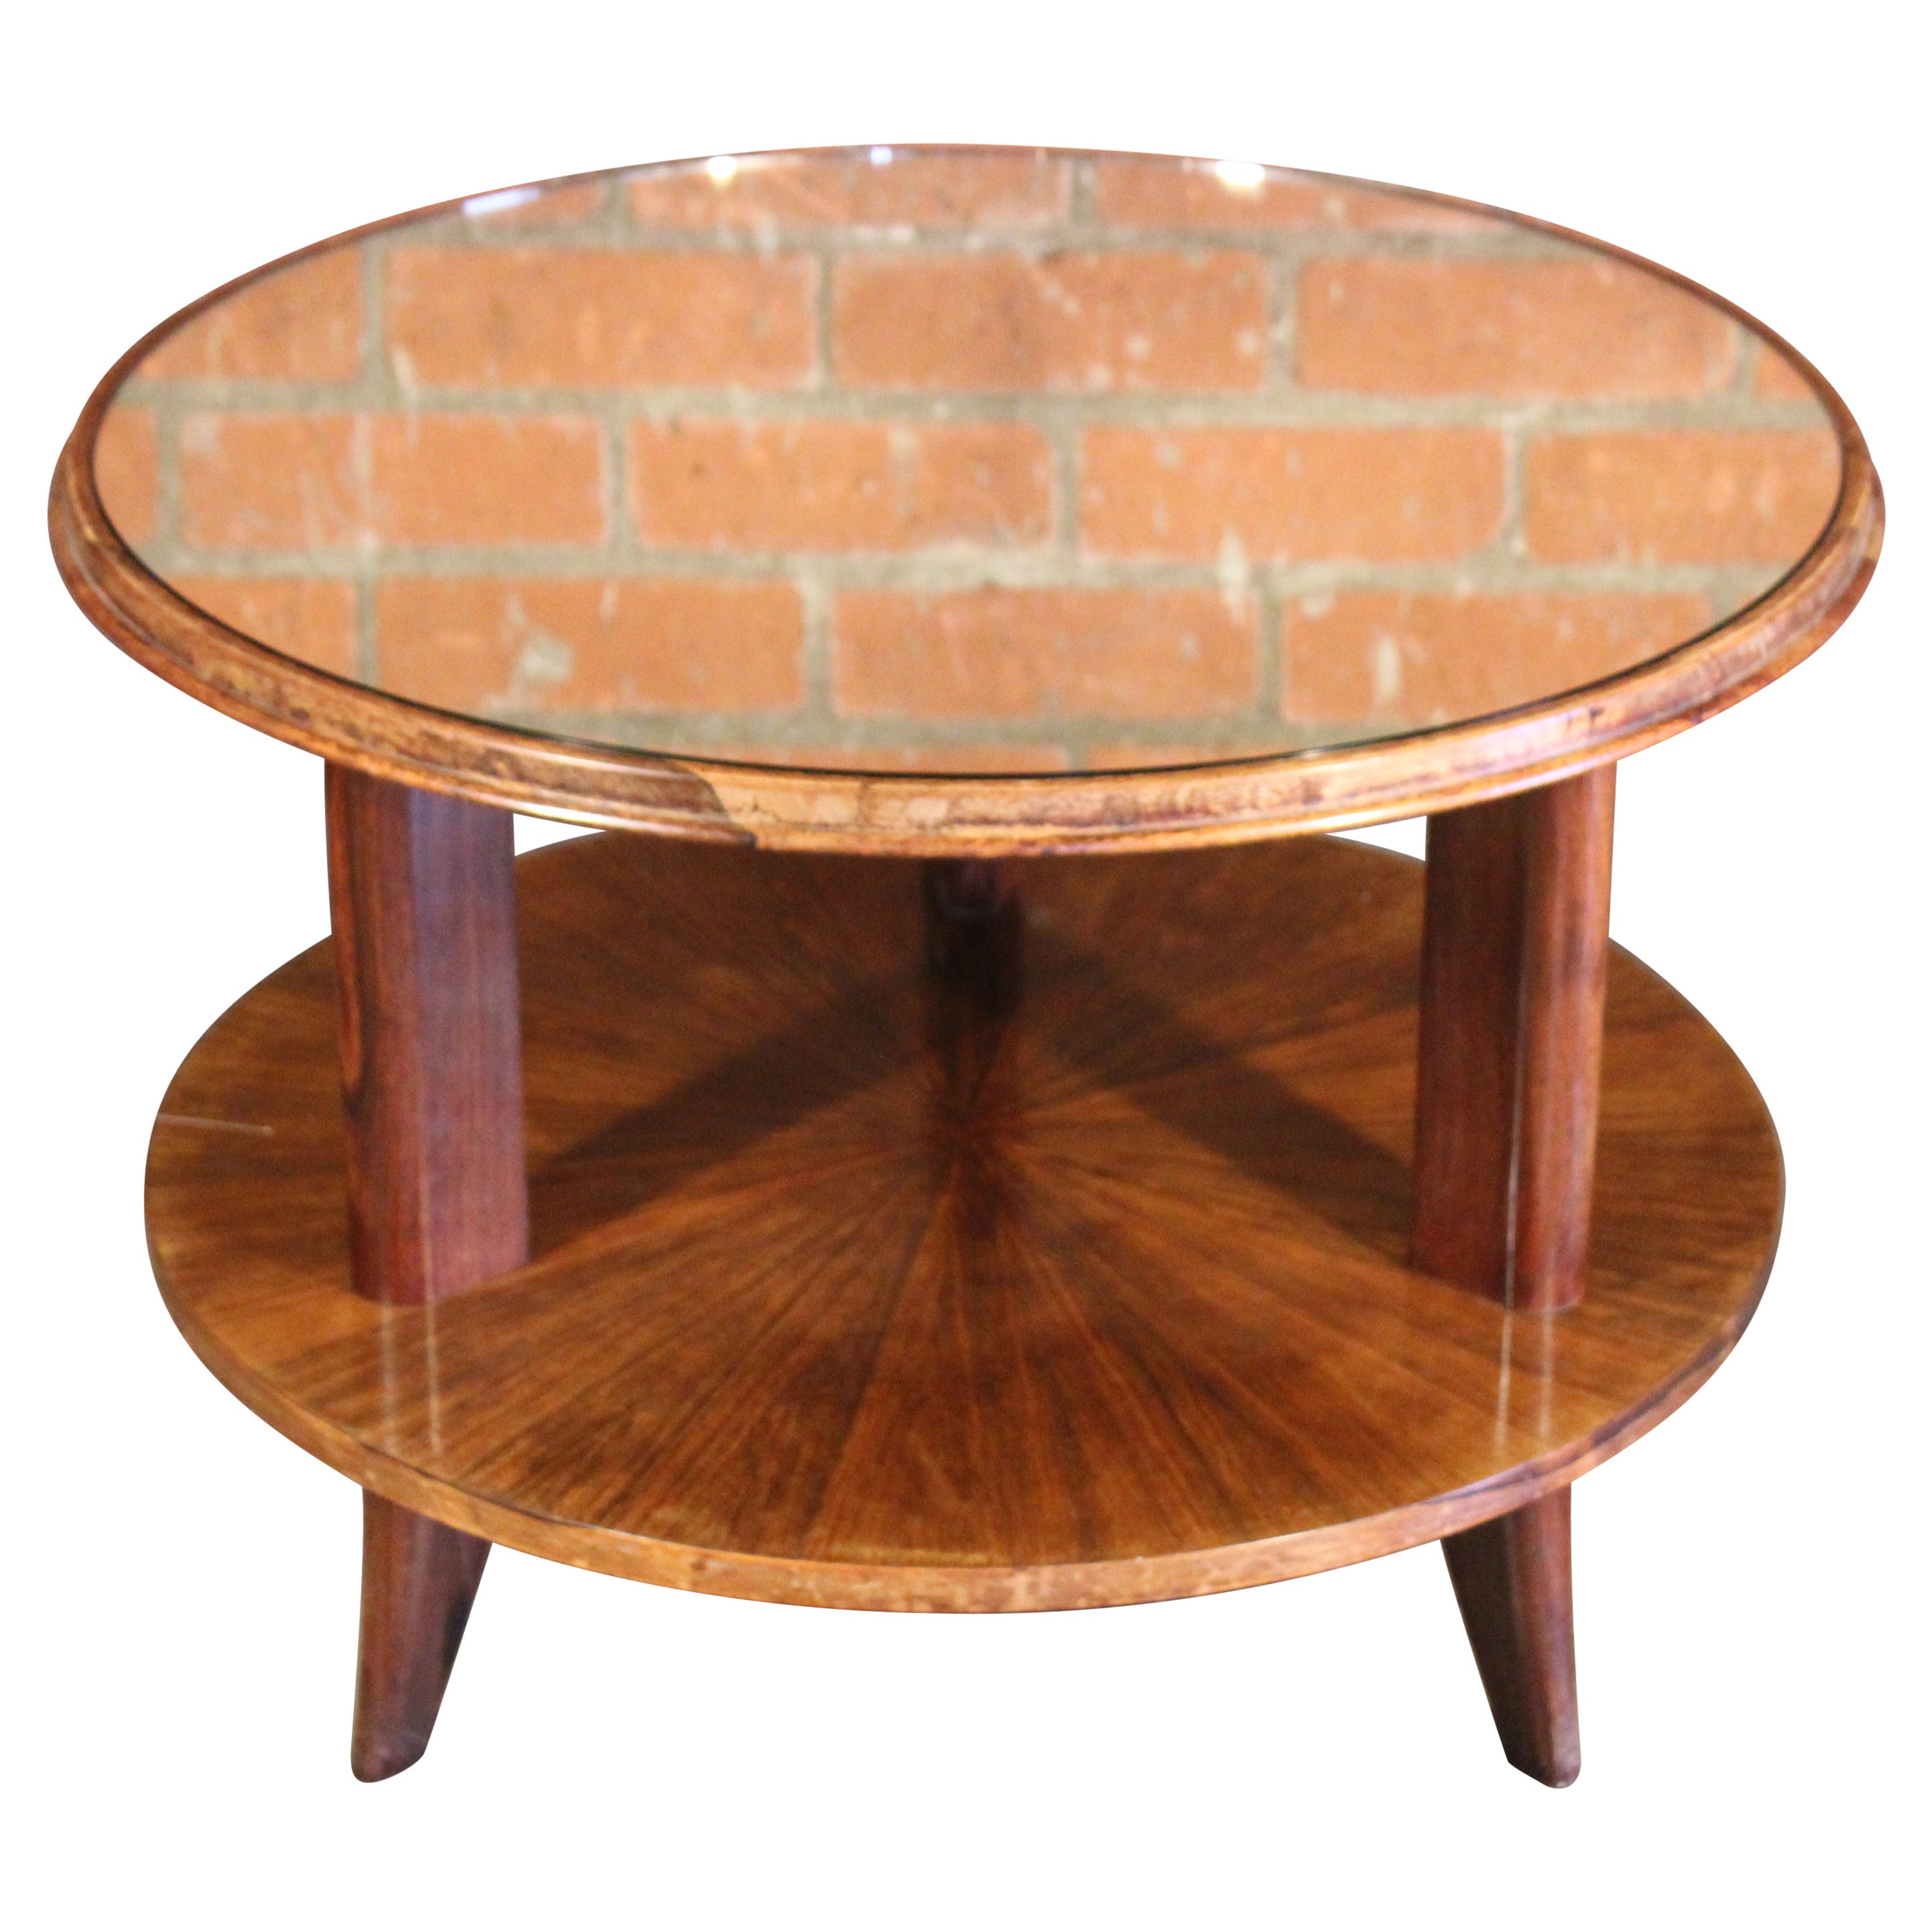 Art Deco Rosewood and Mirror Table Attributed to Paolo Buffa, Italy, 1940s